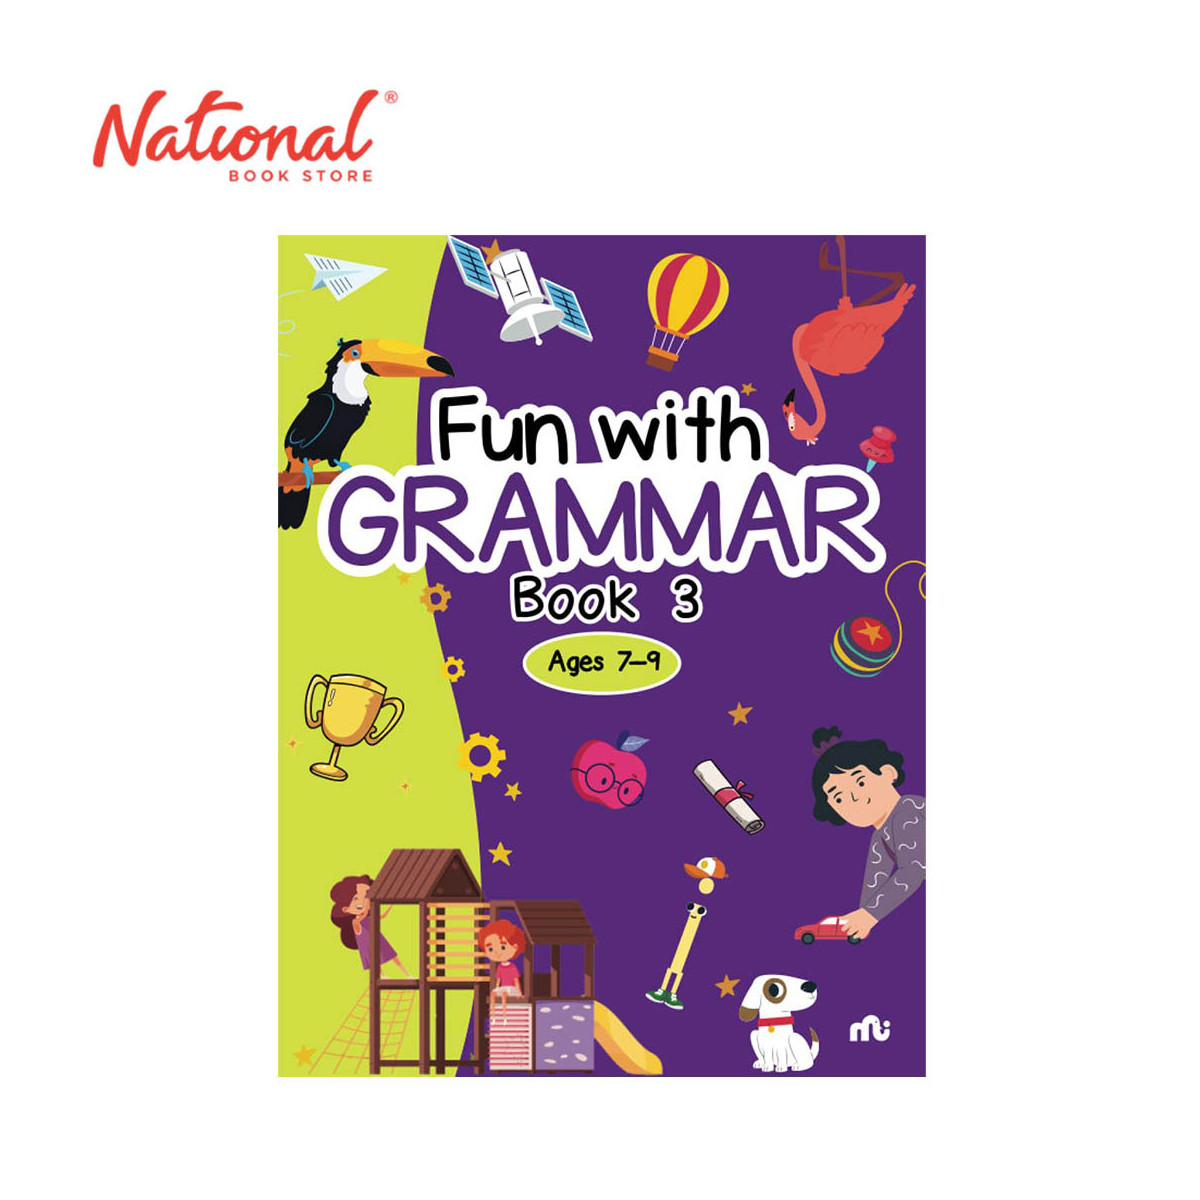 Fun with Grammar Book 3 - Trade Paperback - Activity Books for Kids